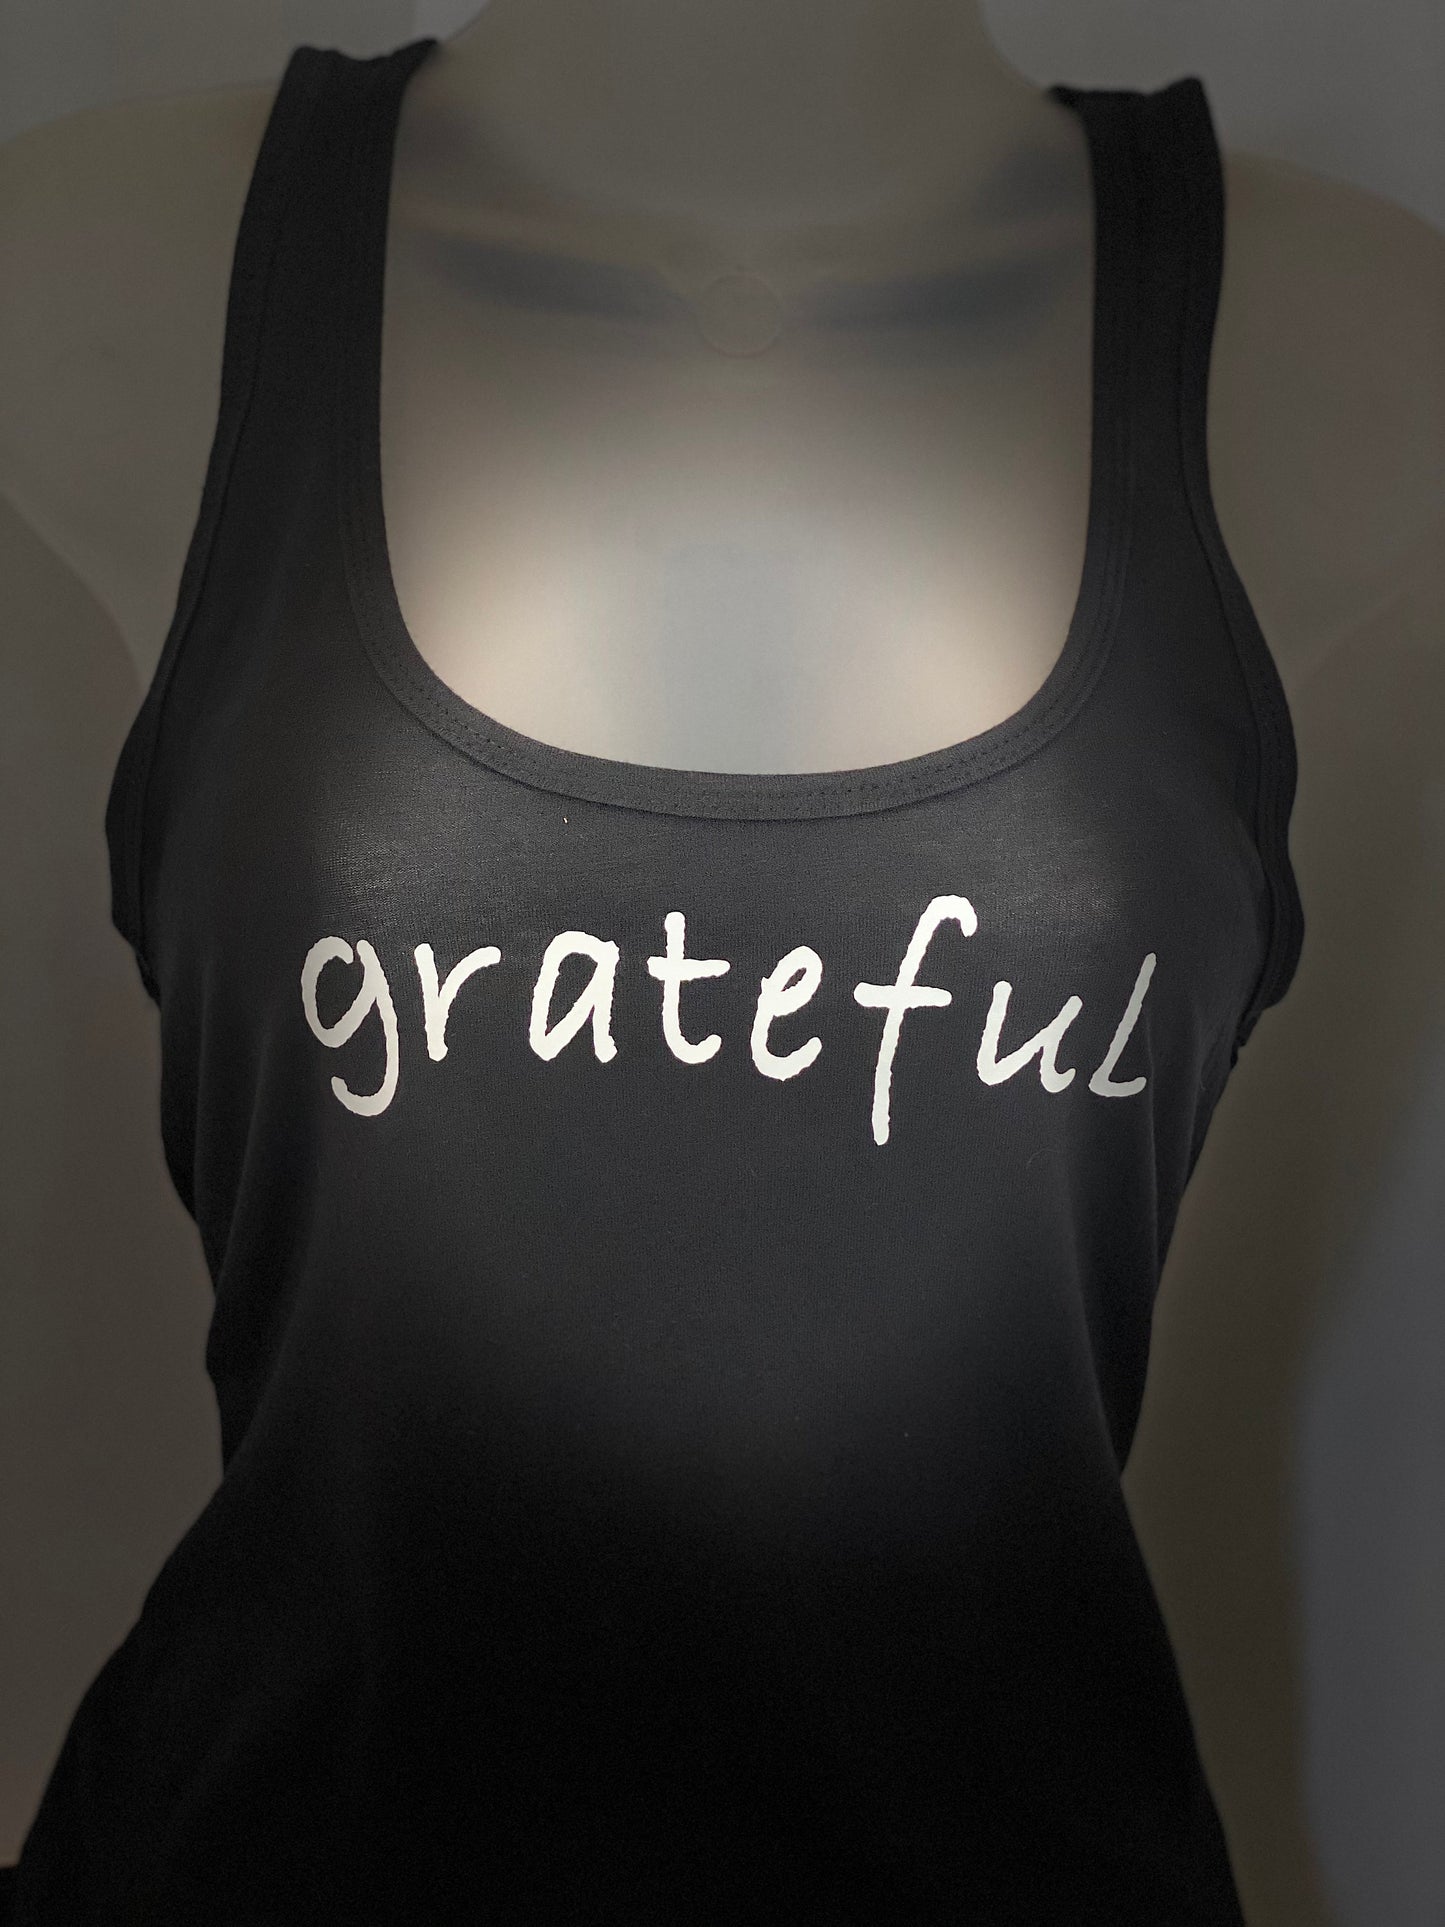 Grateful Tank, T-shirt, Hoodie, or Tote, Inspirational shirt, Positive message, Thankful hoodie